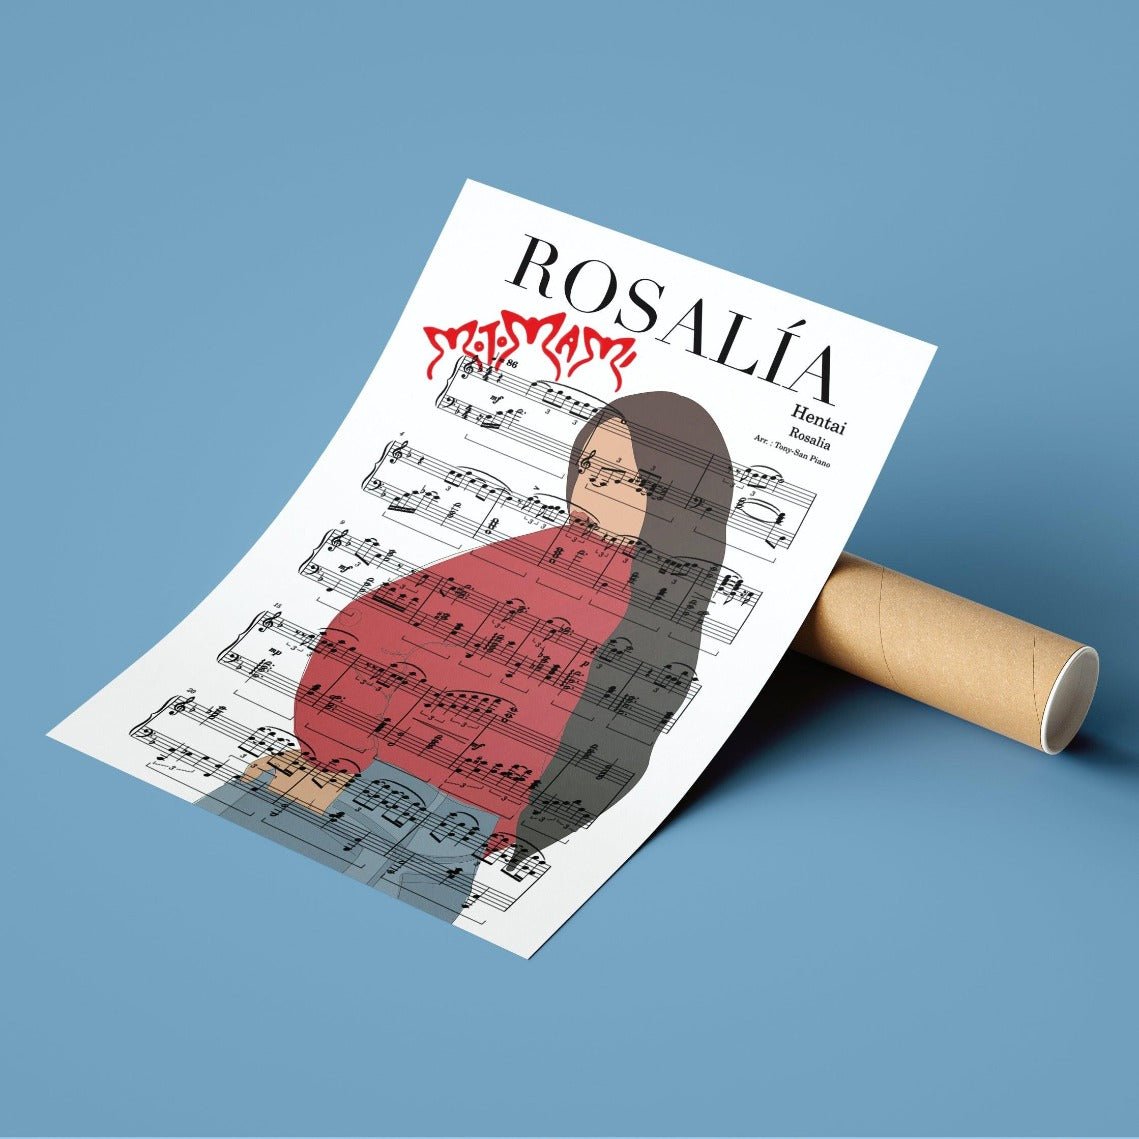 No matter your taste in music, this Rosalia - Hentai Poster is sure to be a hit. With the perfect blend of lyrics and art, it's an eye-catching addition to any room. This poster shows off personalized song lyric gifts on top of Rosalia's incredible music. The personalized song lyrics print is the ultimate gift for any music lover. Showing off your favorite lyrics in a creative way, this poster celebrates Rosalia’s amazing songs